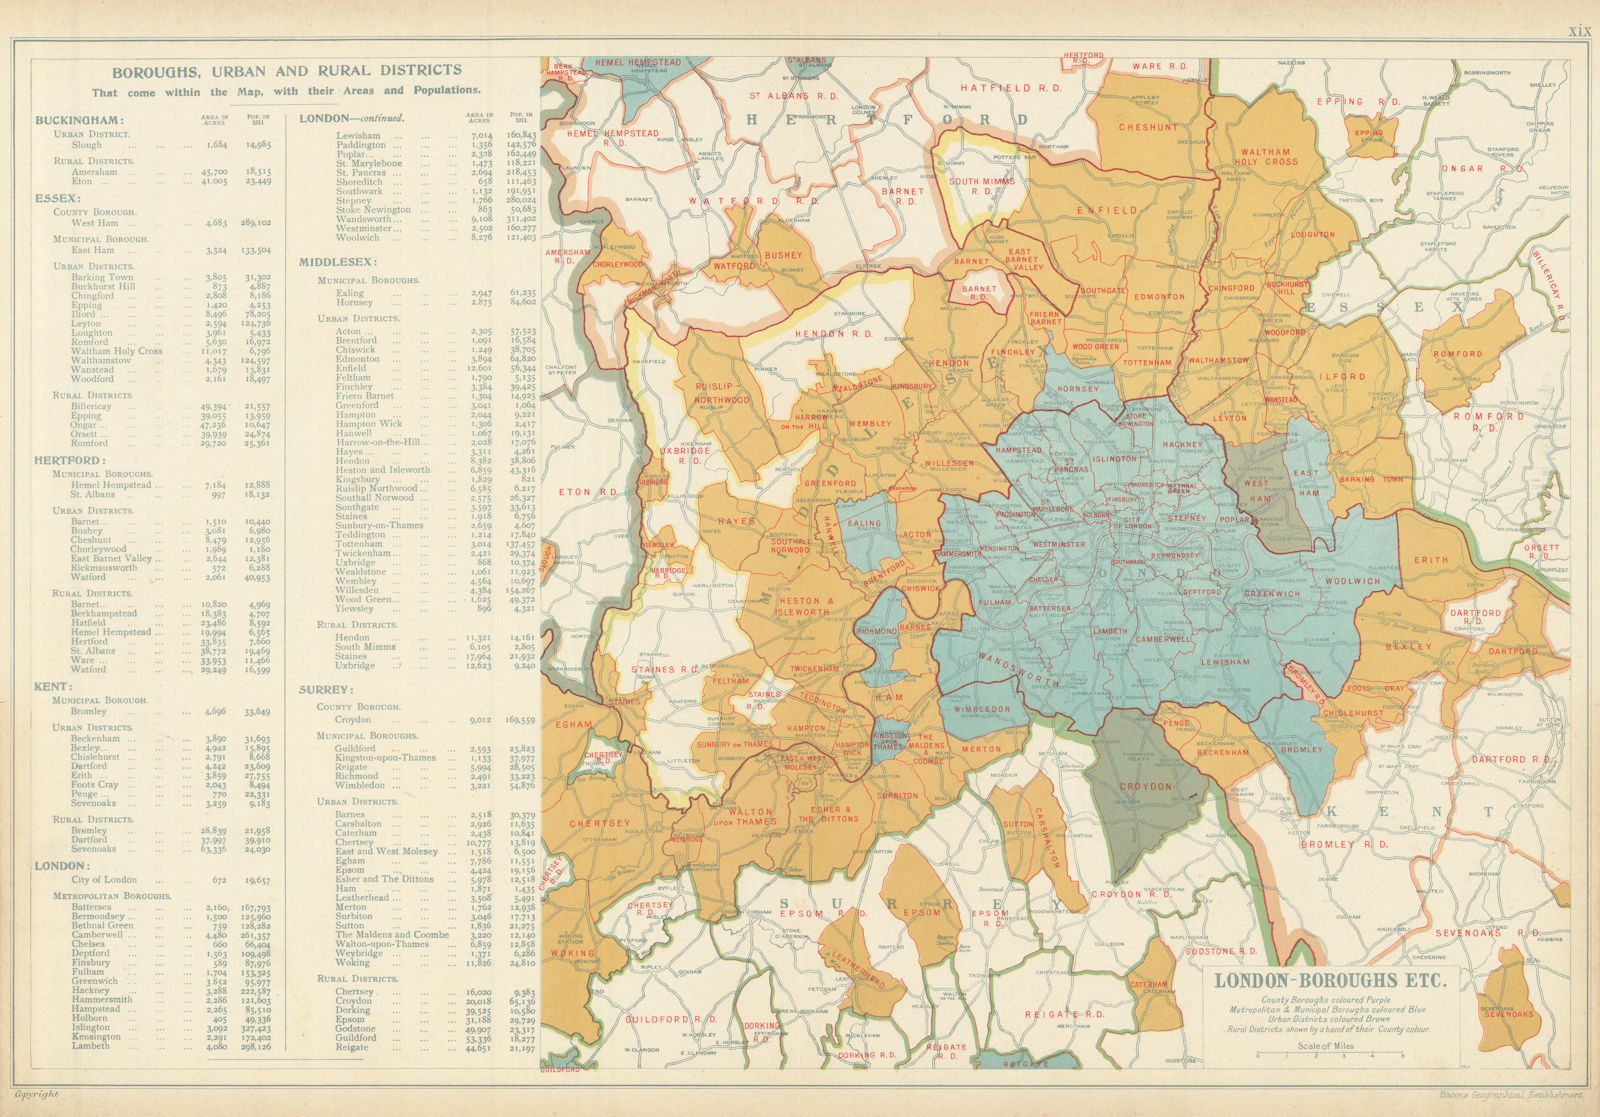 Associate Product LONDON showing Municipal Boroughs, Urban Districts & Rural areas. BACON 1913 map